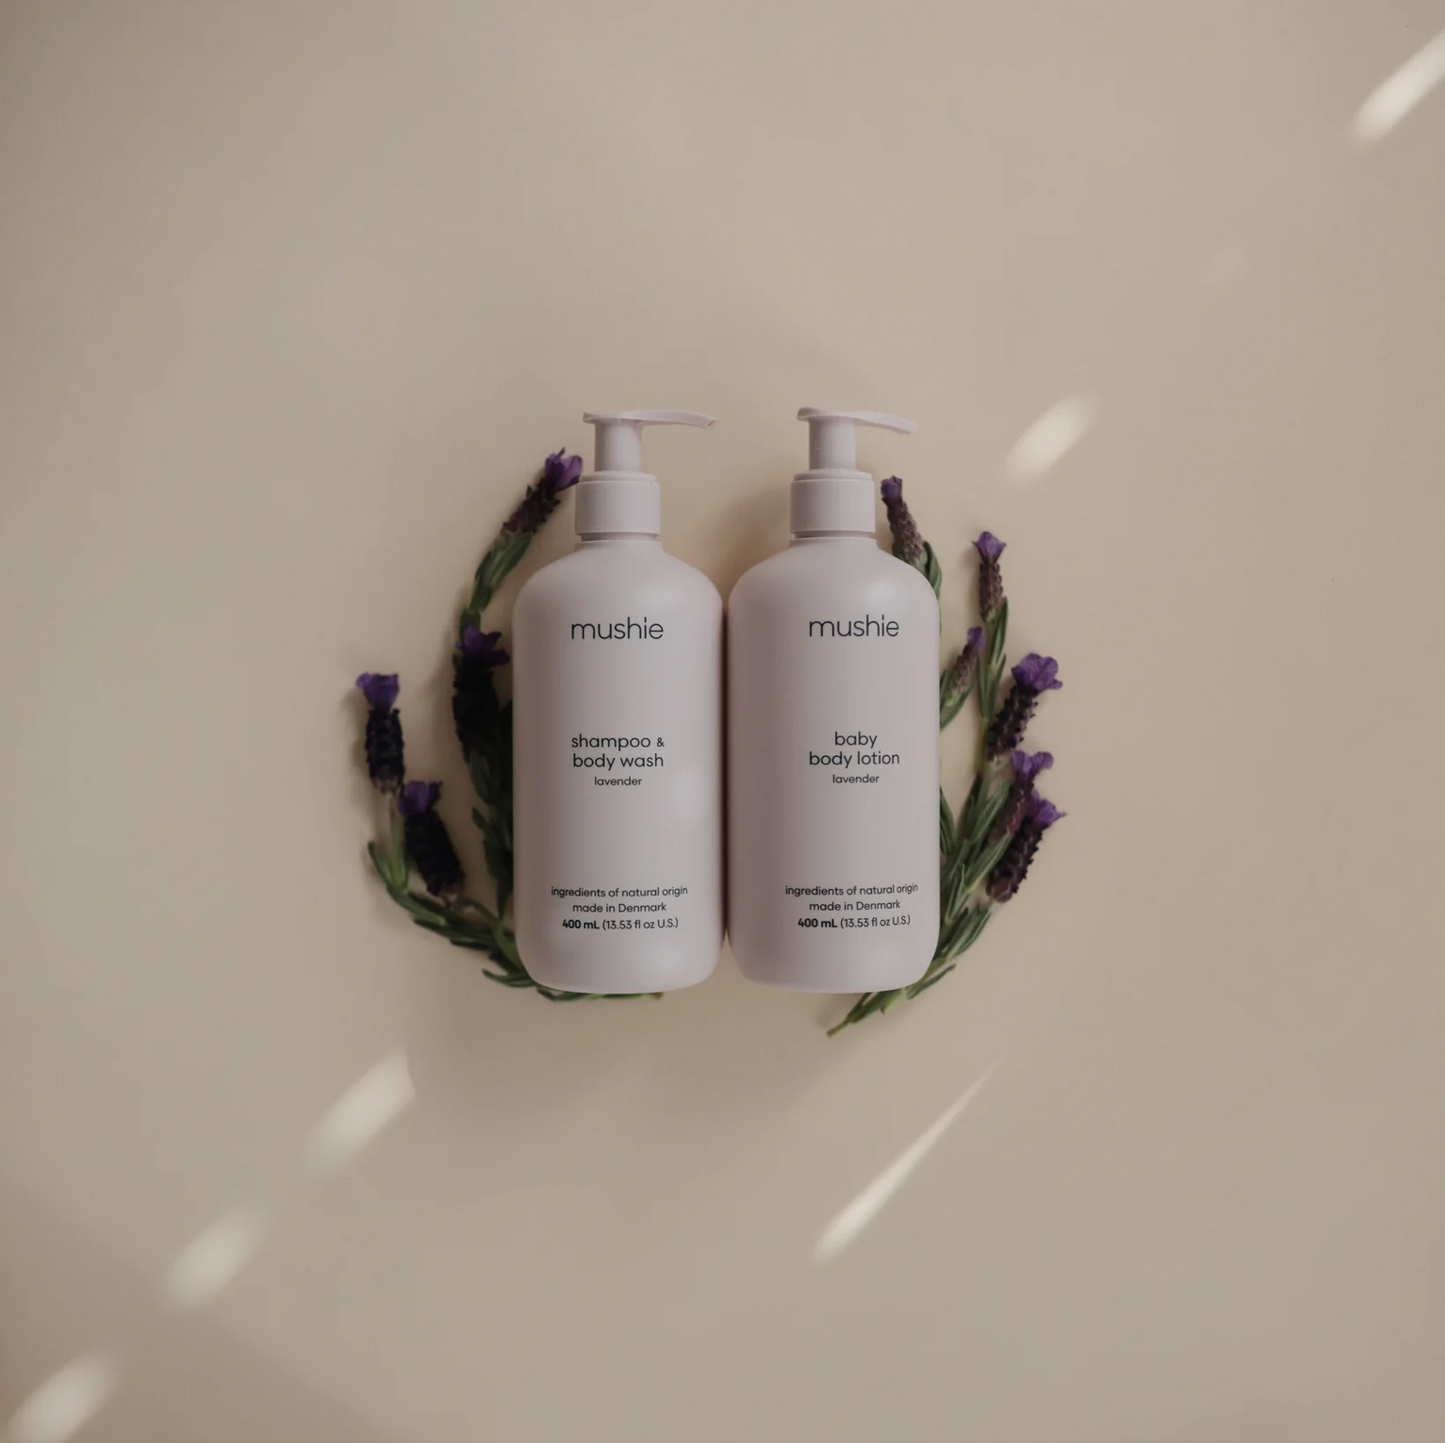 Baby body lotion and shampoo & body wash lavender from Mushie